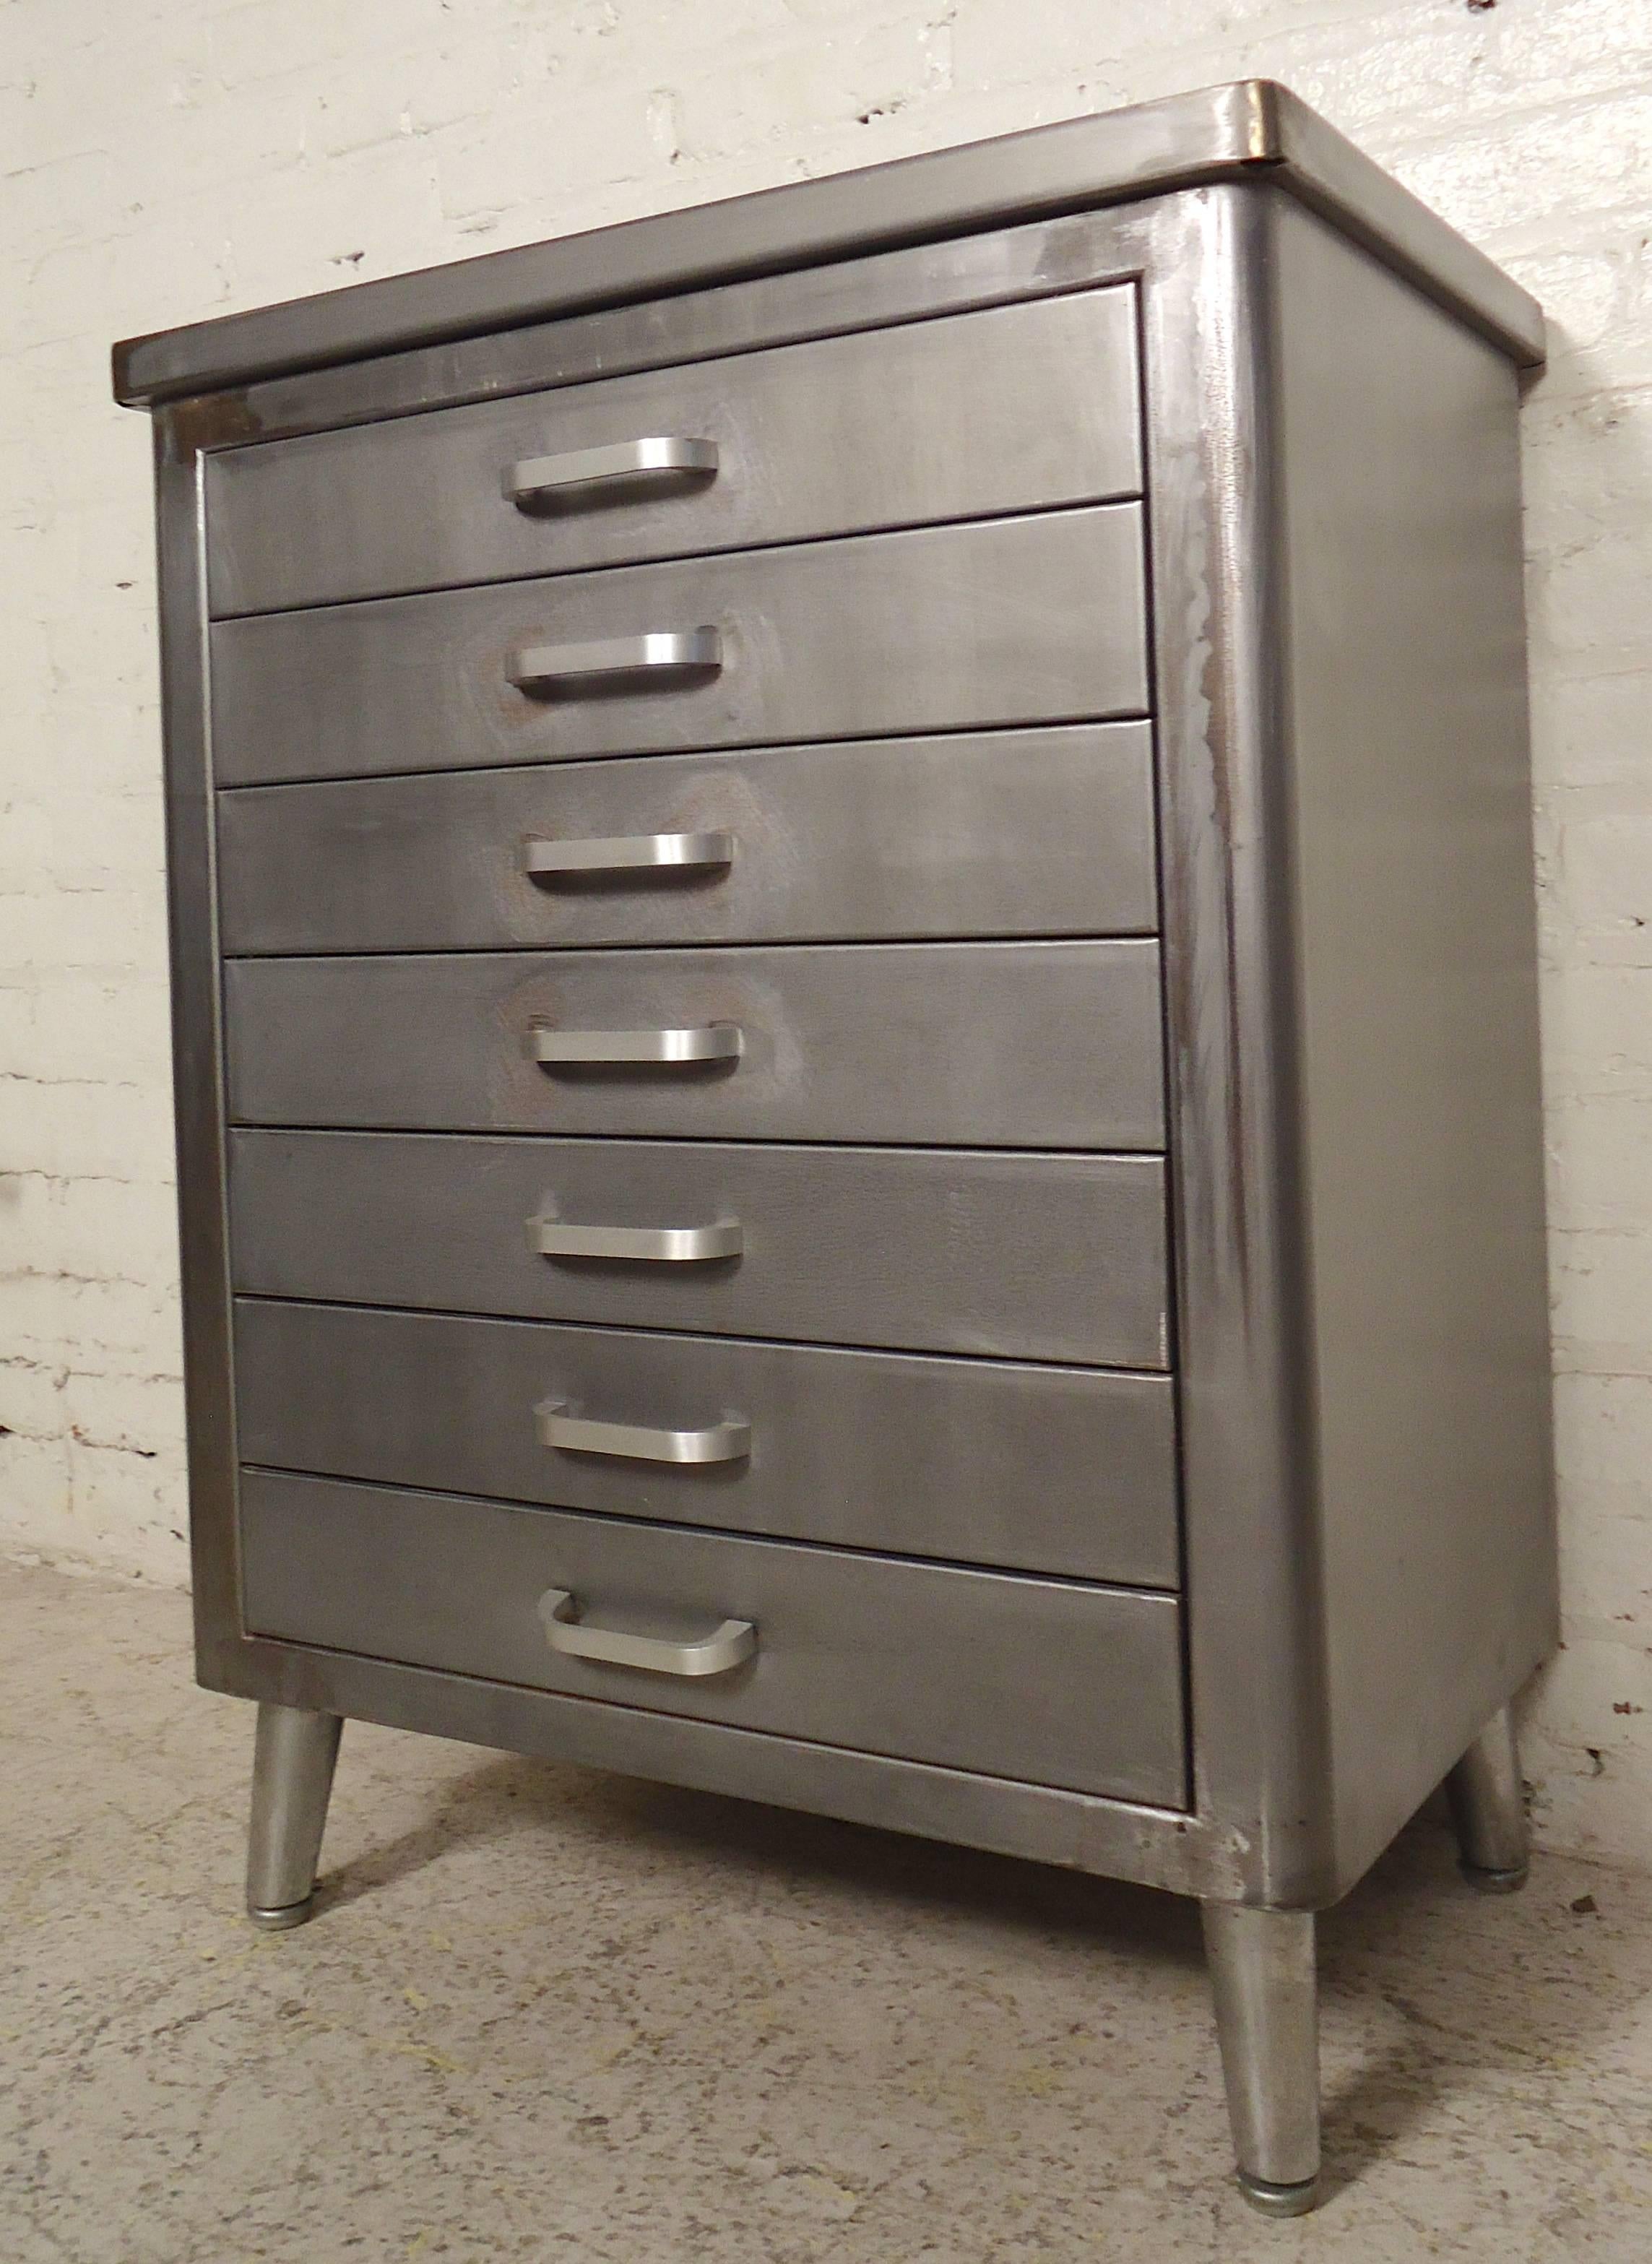 Seven-drawer vintage cabinet has been refinished and features splayed metal legs. Great for bathroom or kitchen storage.

(Please confirm item location NY or NJ with dealer).
 